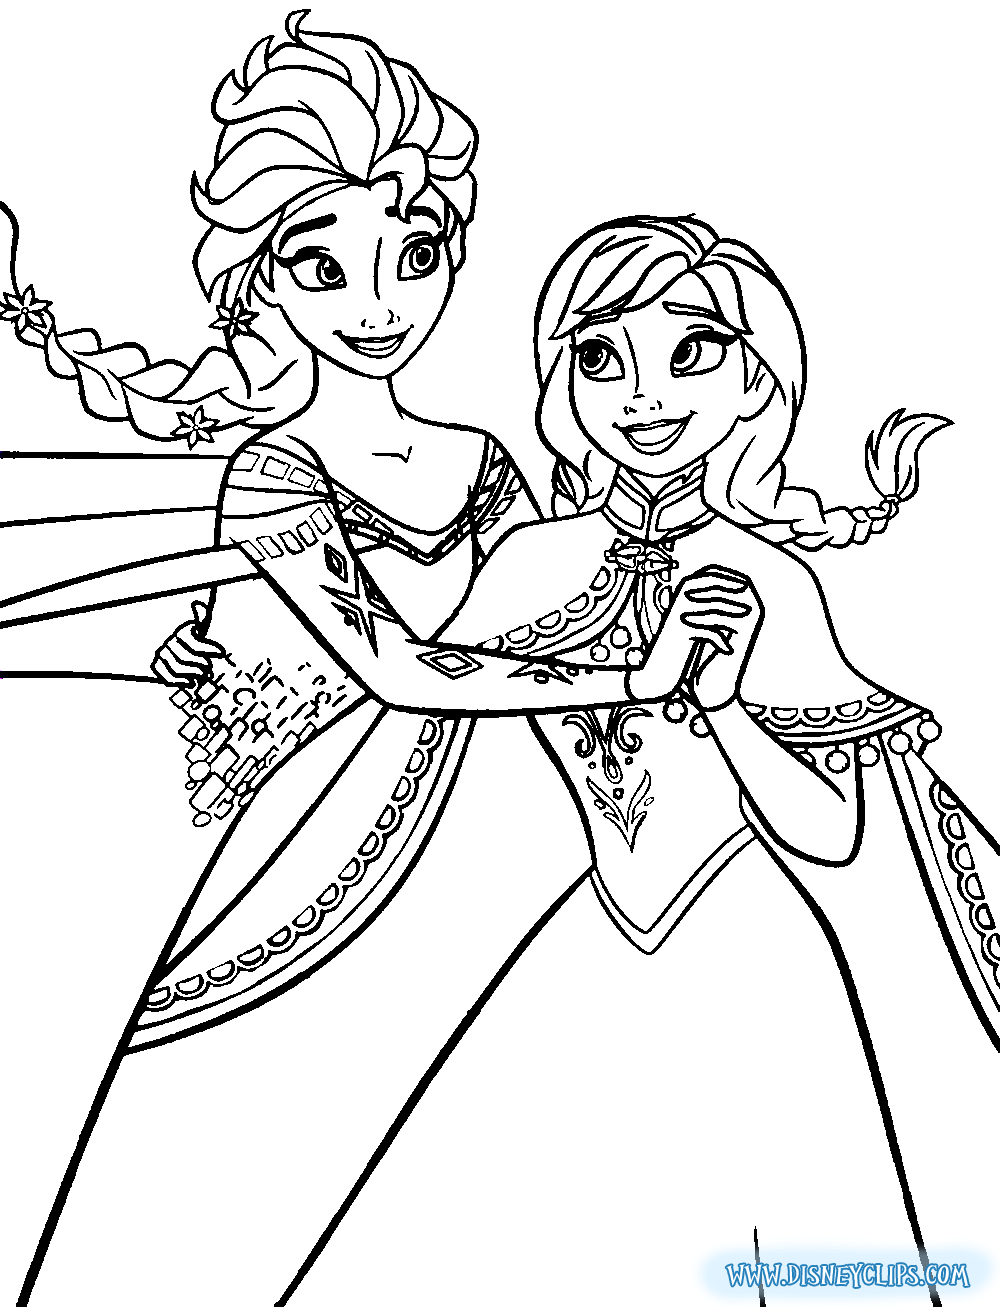 Frozen clipart to print 